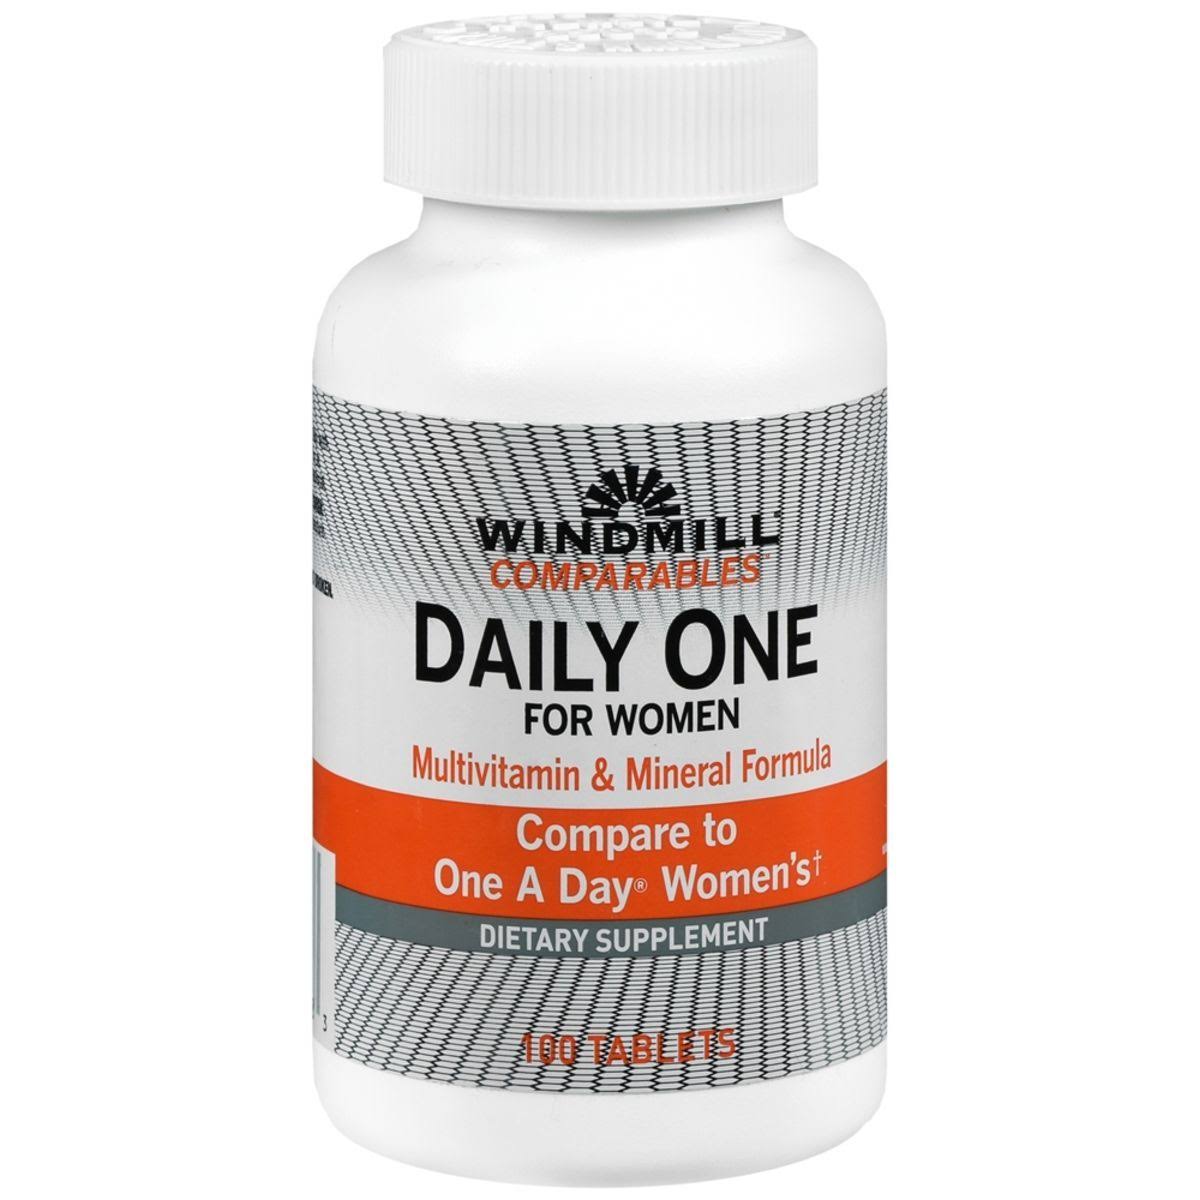 Windmill Health Formula Daily High Potency Women's Multi Vitamin Supplement - 100 Tablets